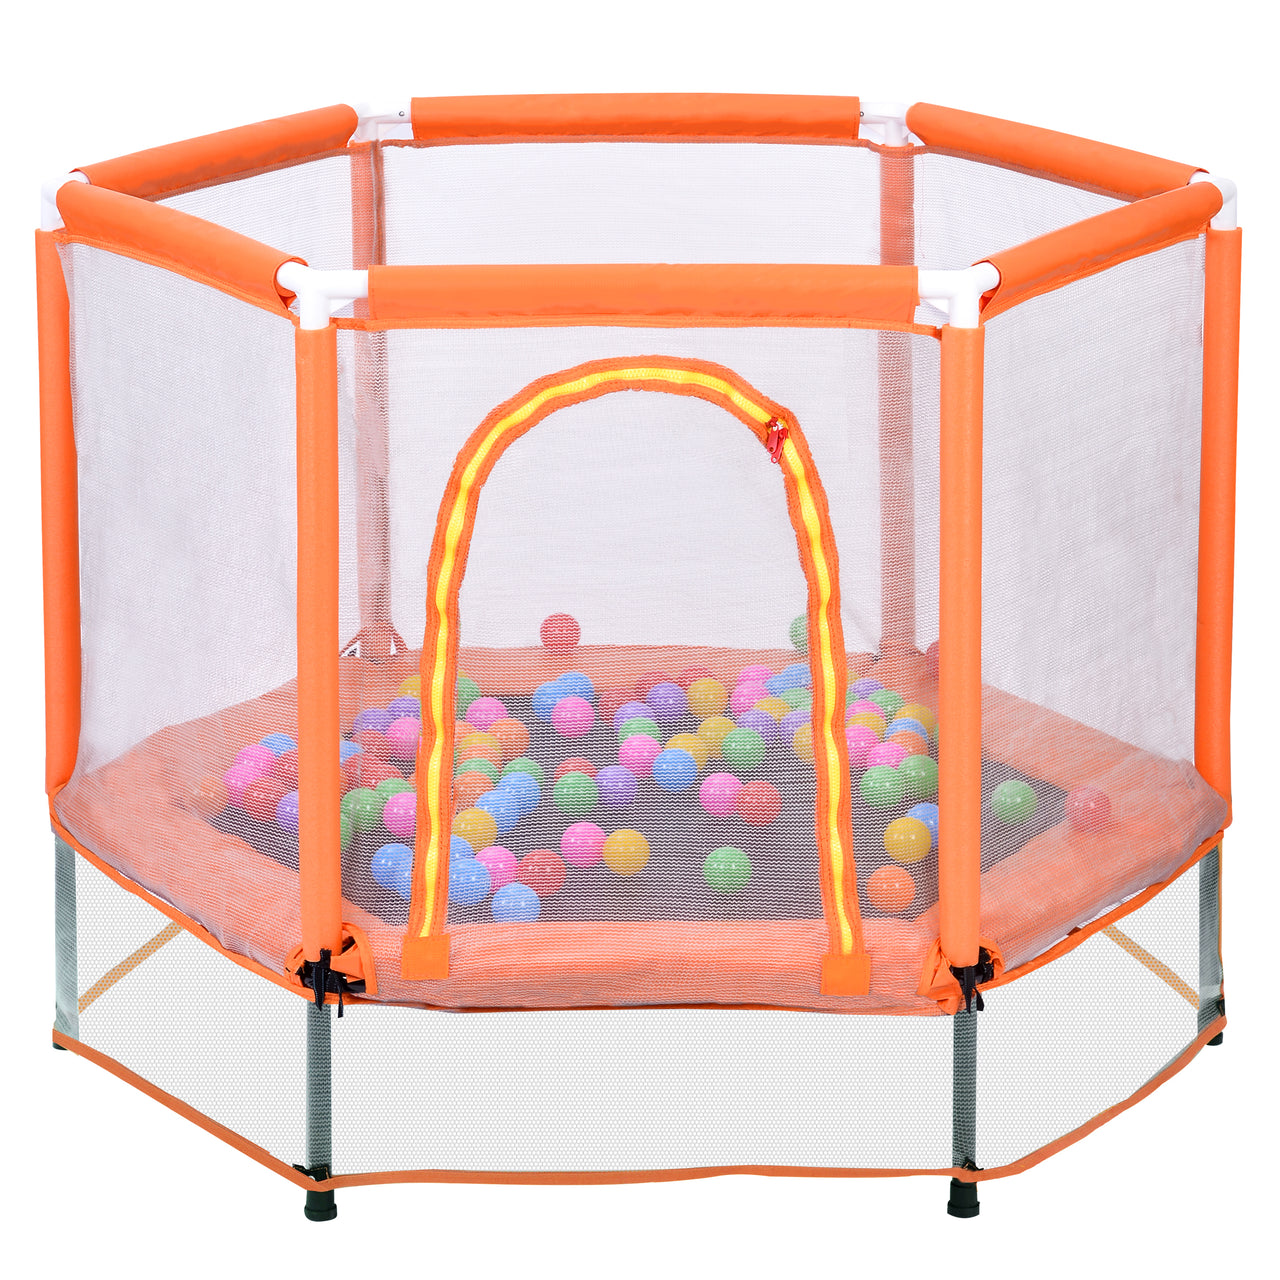 55 Toddlers Trampoline Net and Balls, Mini Trampoline for Kids